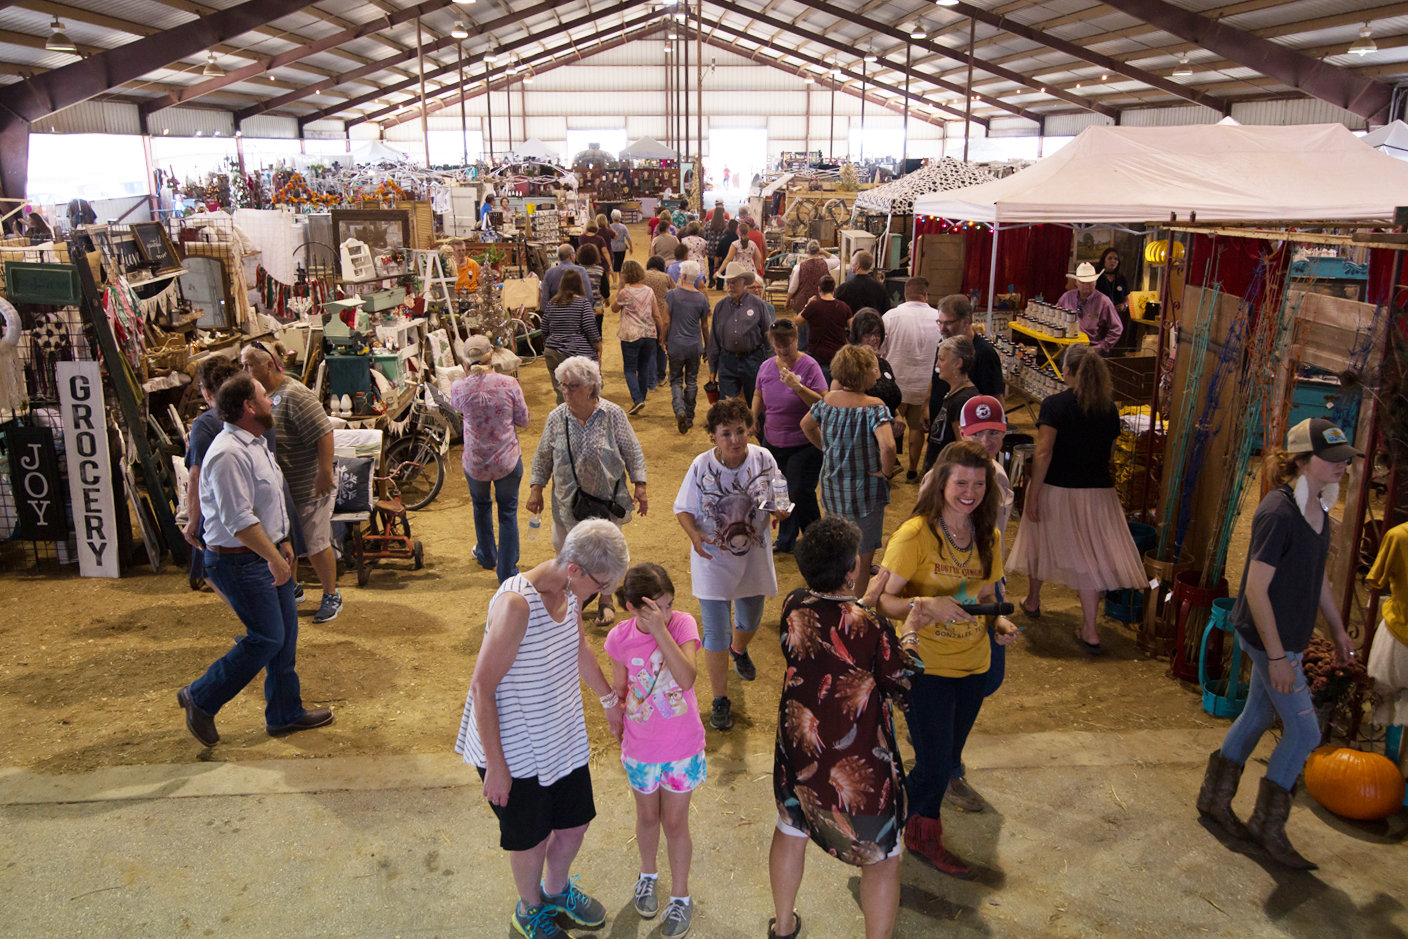 Patrons from all over the state venture to Gonzales for Rusted Gingham’s annual barn sale. This year’s event kicks off at 4 p.m. Nov. 2 at the J.B. Wells Show Barn.